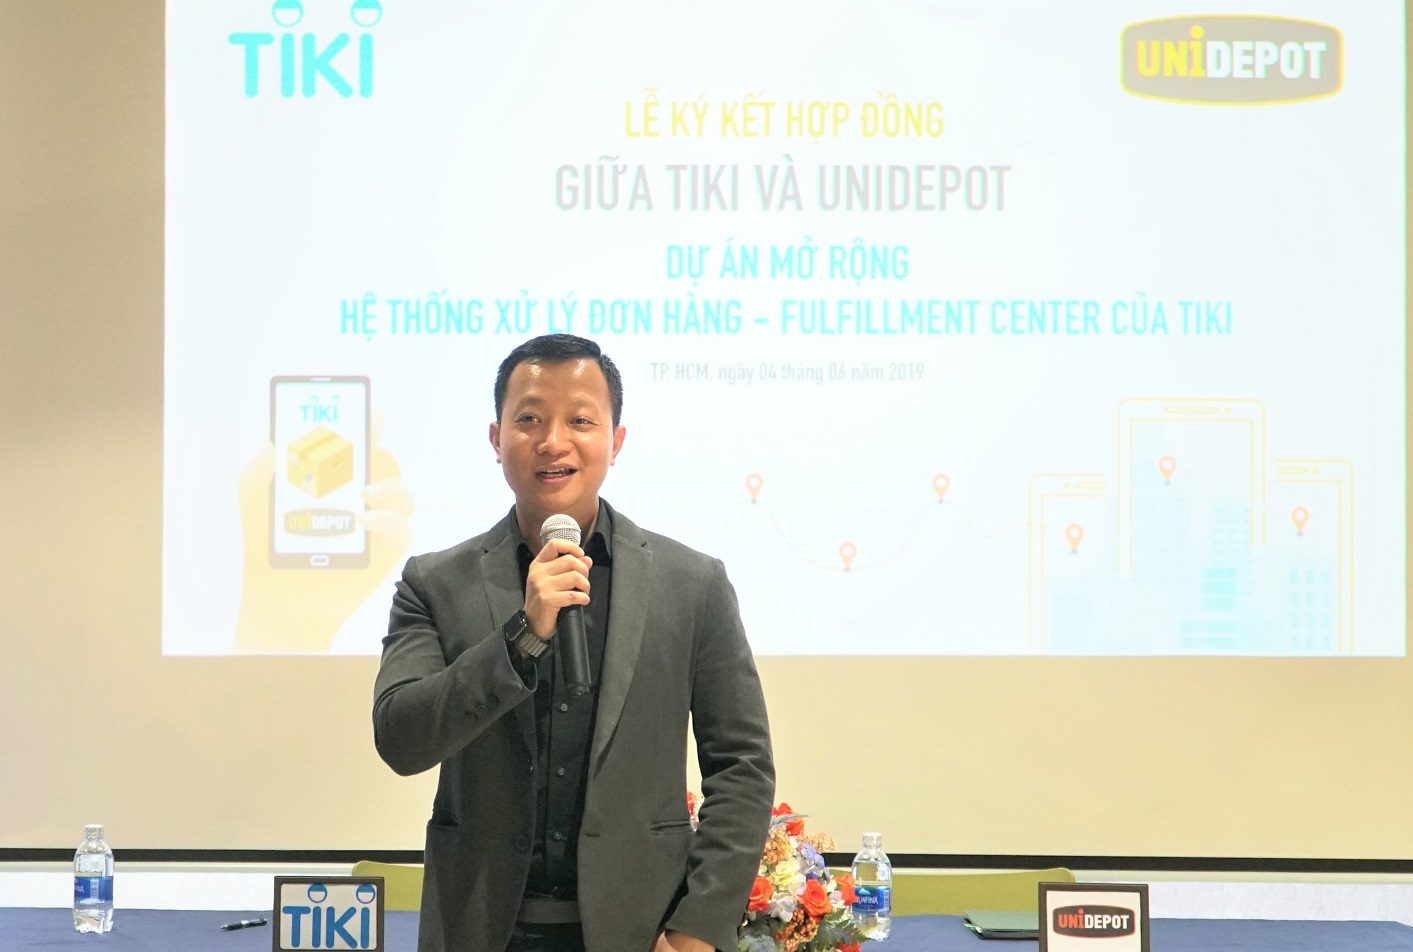 Tiki, often called Amazon of Vietnam, is not taking that title lightly